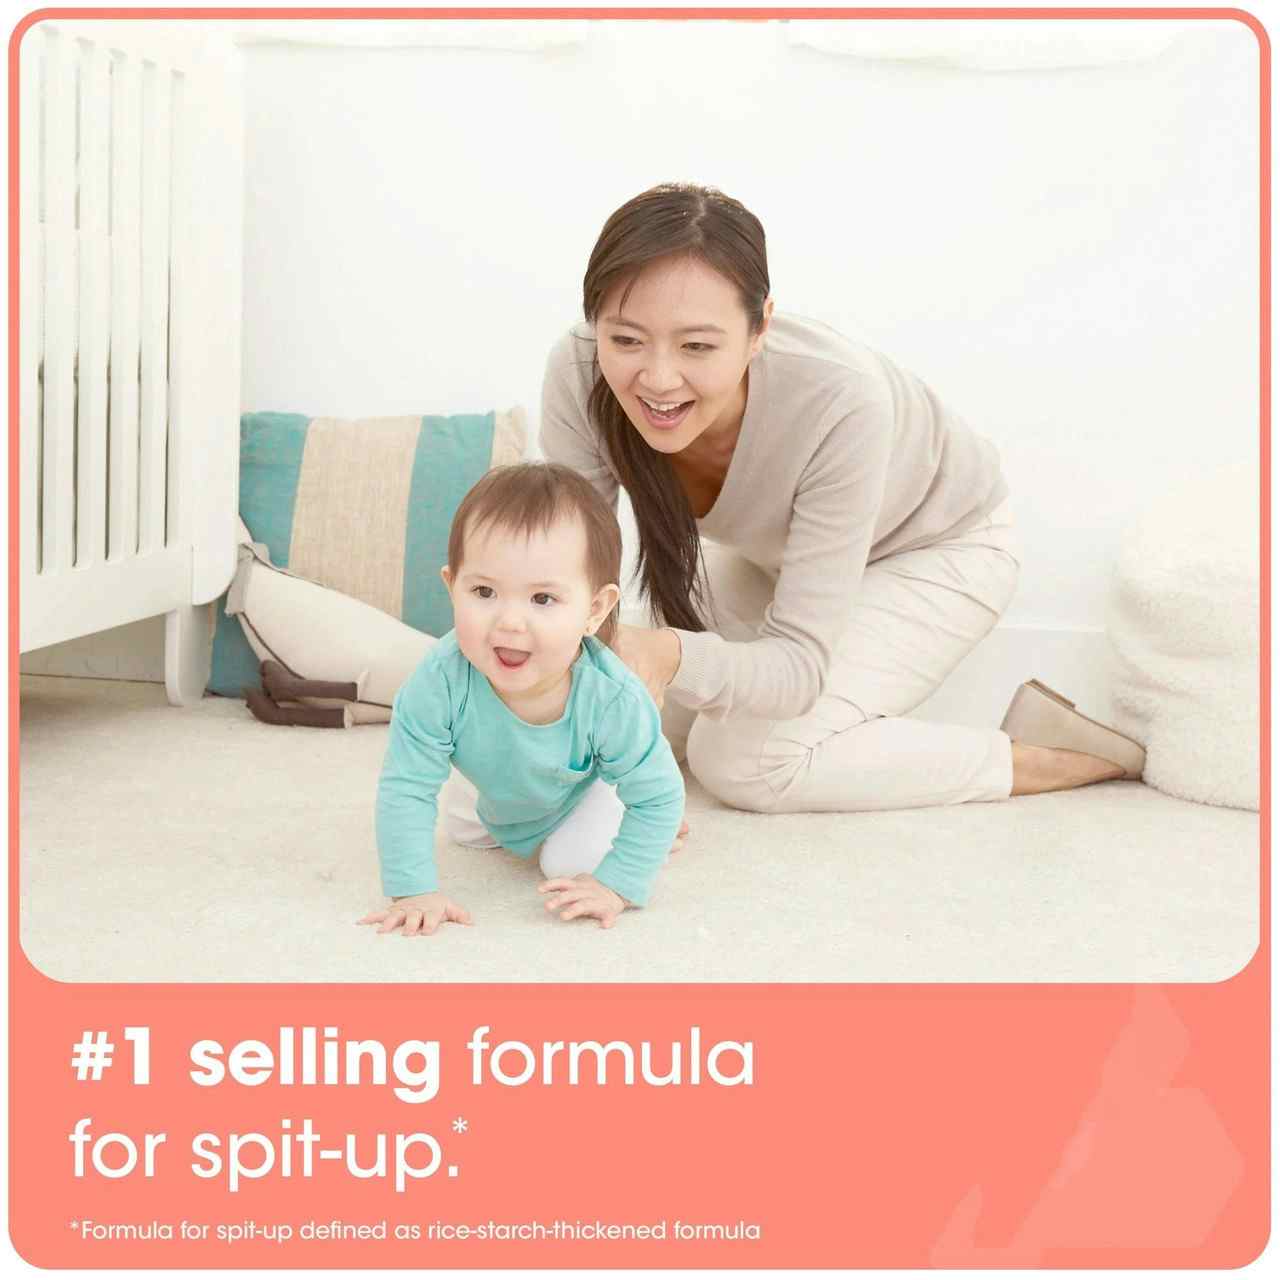 Enfamil A.R. Ready-to-use Formula with Lipil, Unflavored, 2 oz., 145301, # 1 Selling Formula